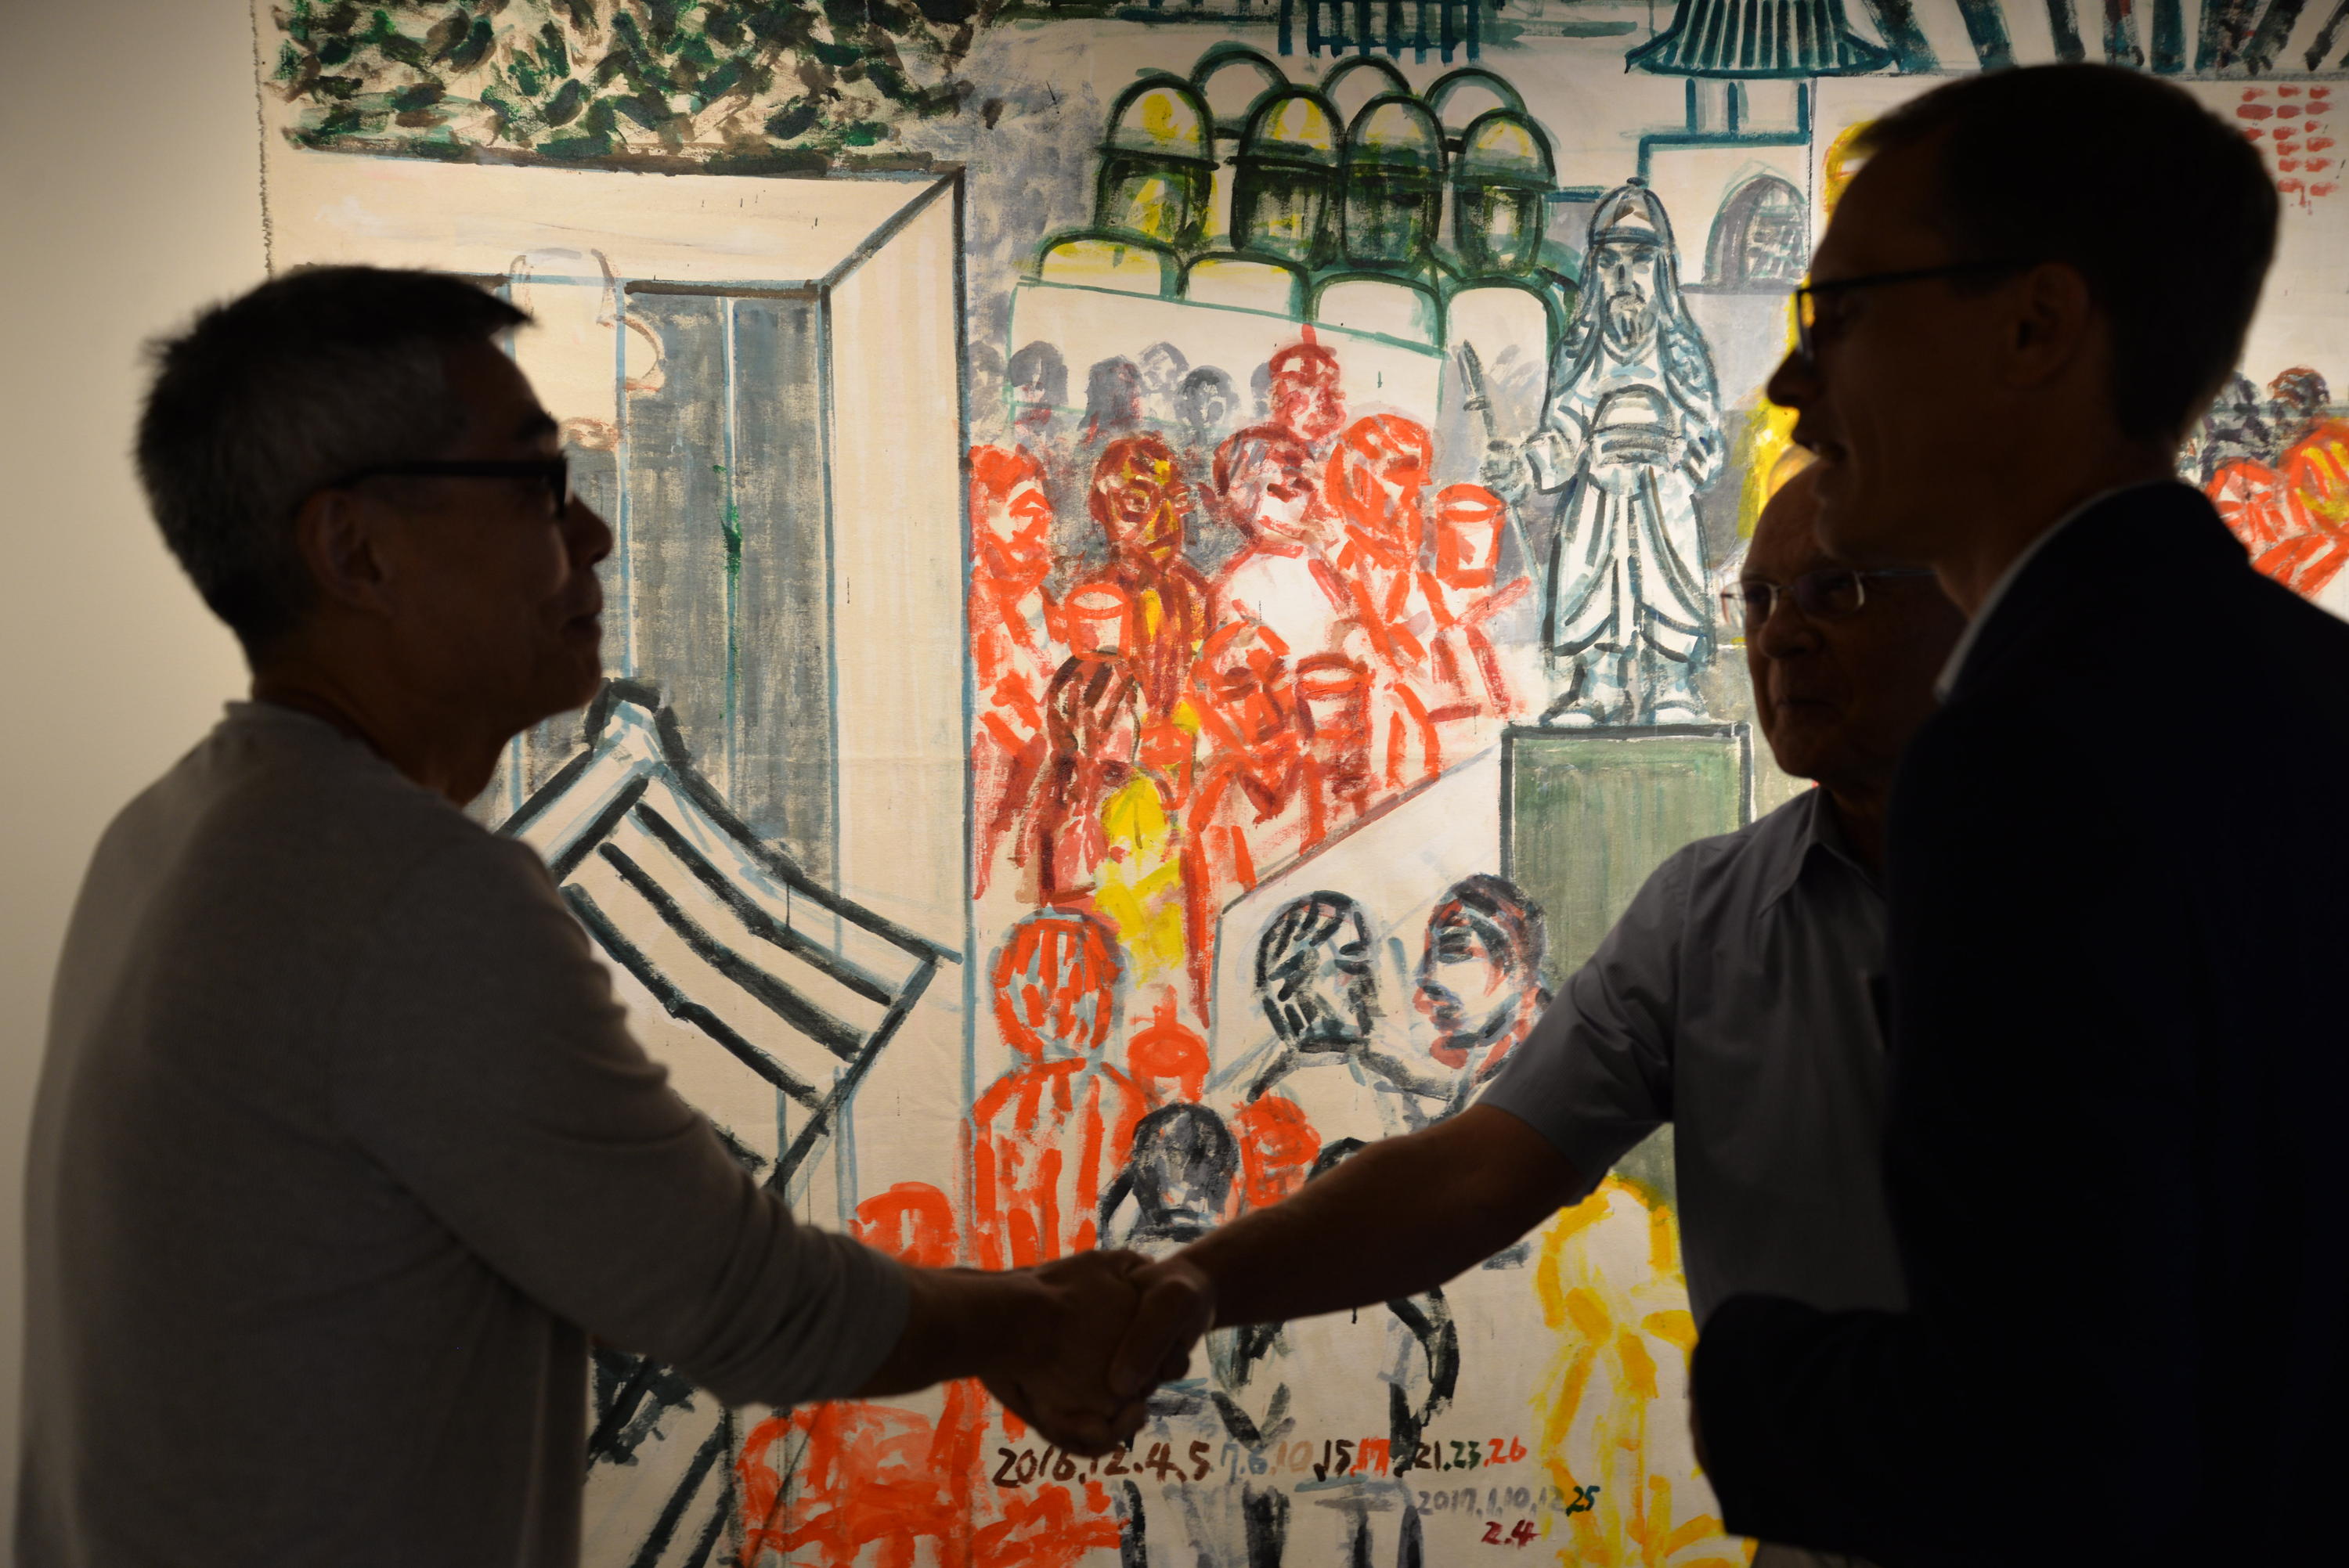 Two men shaking hands with art in background 